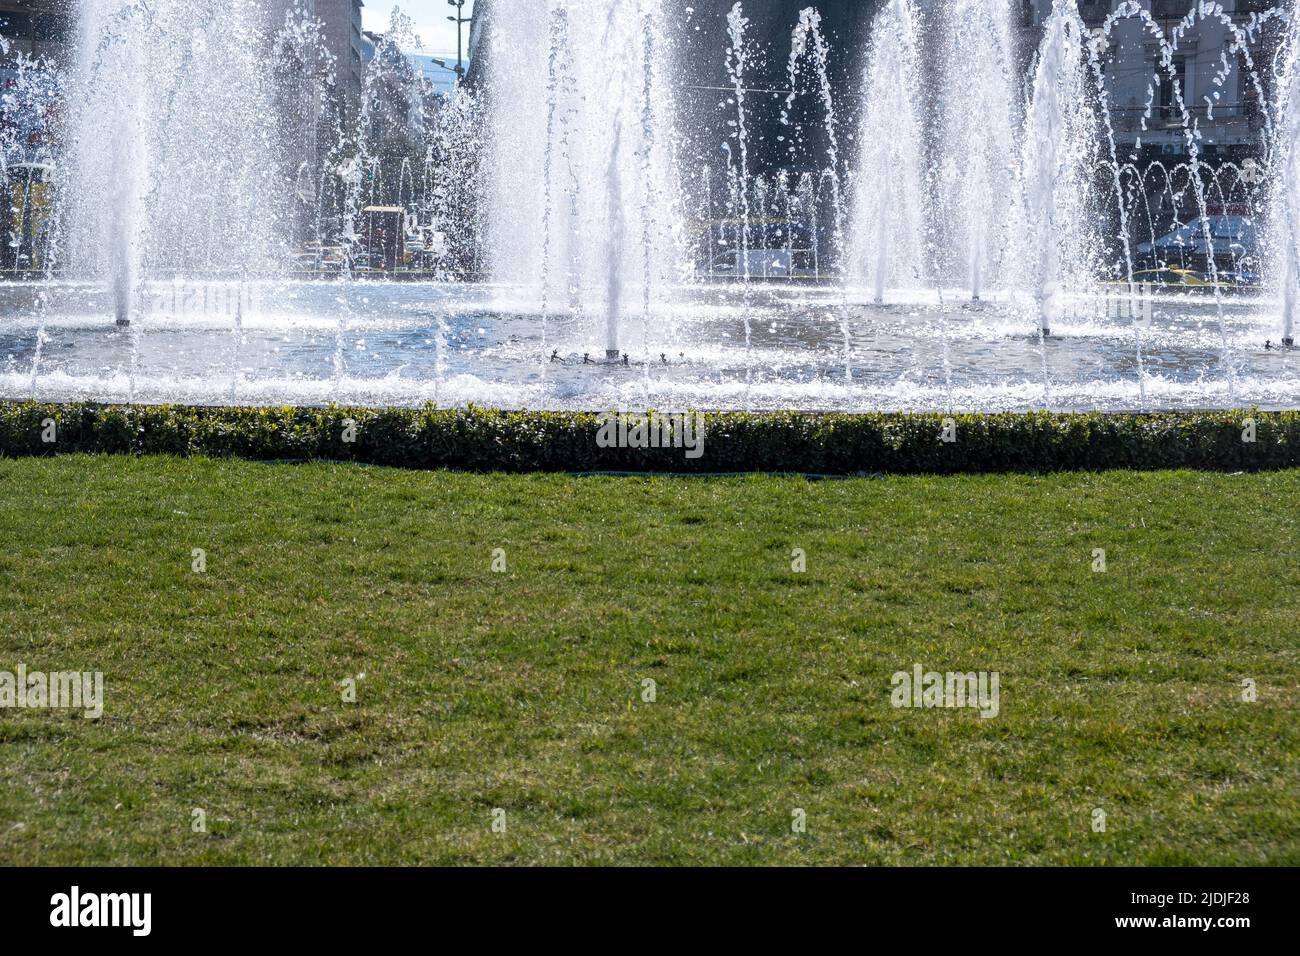 Fountain in the city center. Water moving jets decorate a round shape town square, small pond and grass around, sunny day, close up view Stock Photo